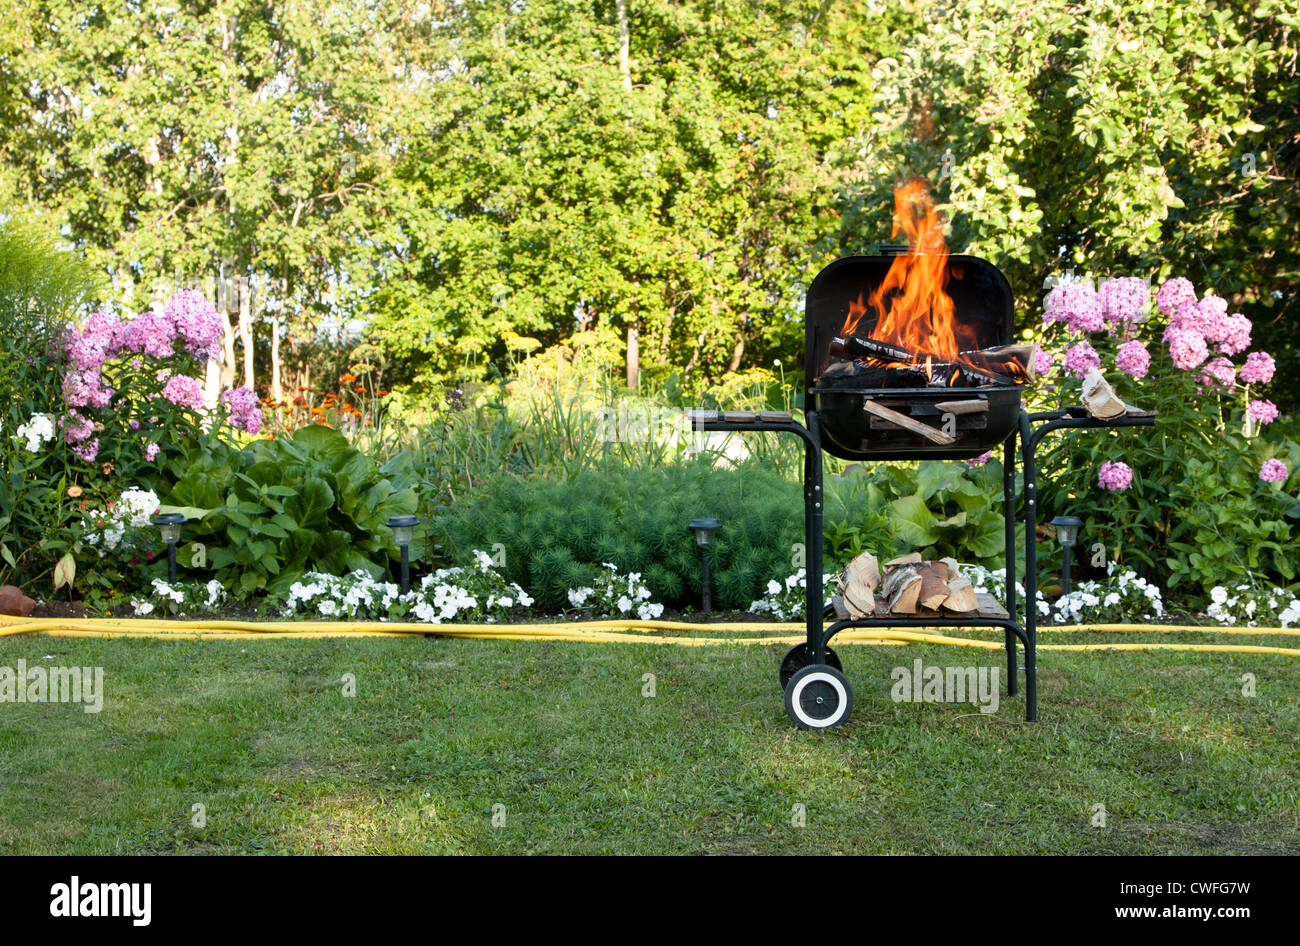 Flames in a barbecue Stock Photo